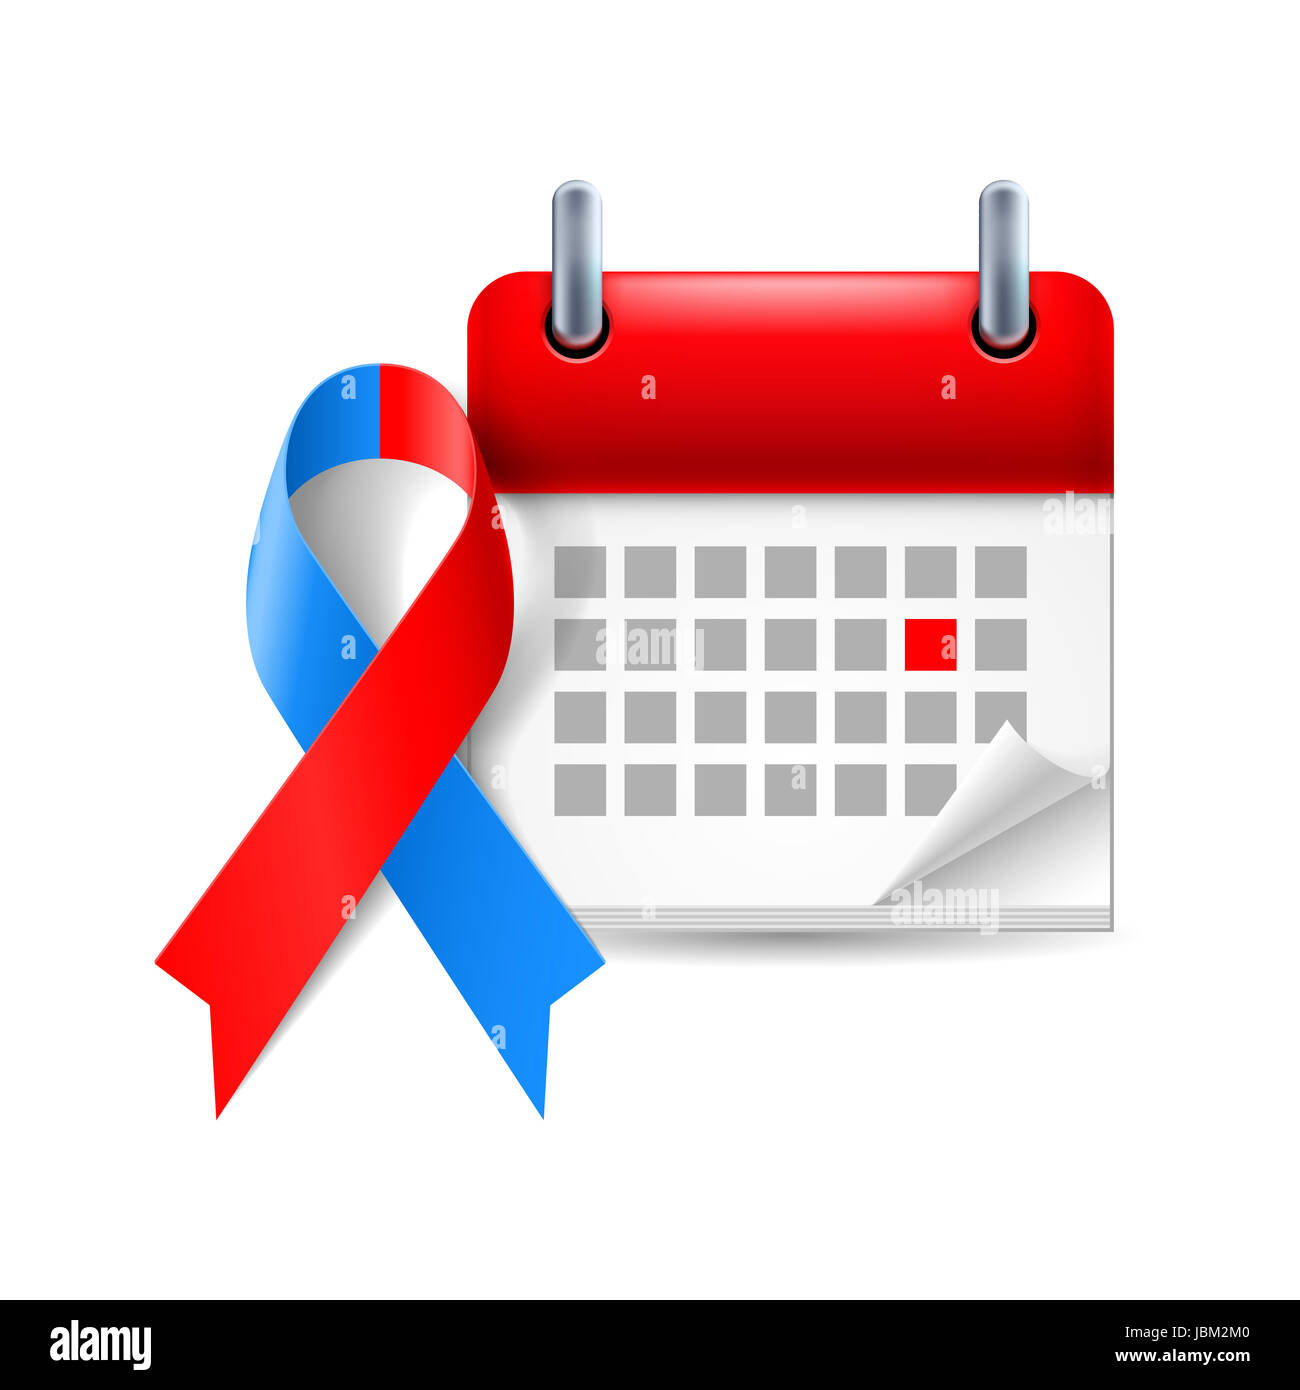 Red and blue awareness ribbon and calendar with marked day. Noonan syndrome, Congenital Heart Defect symbol Stock Photo